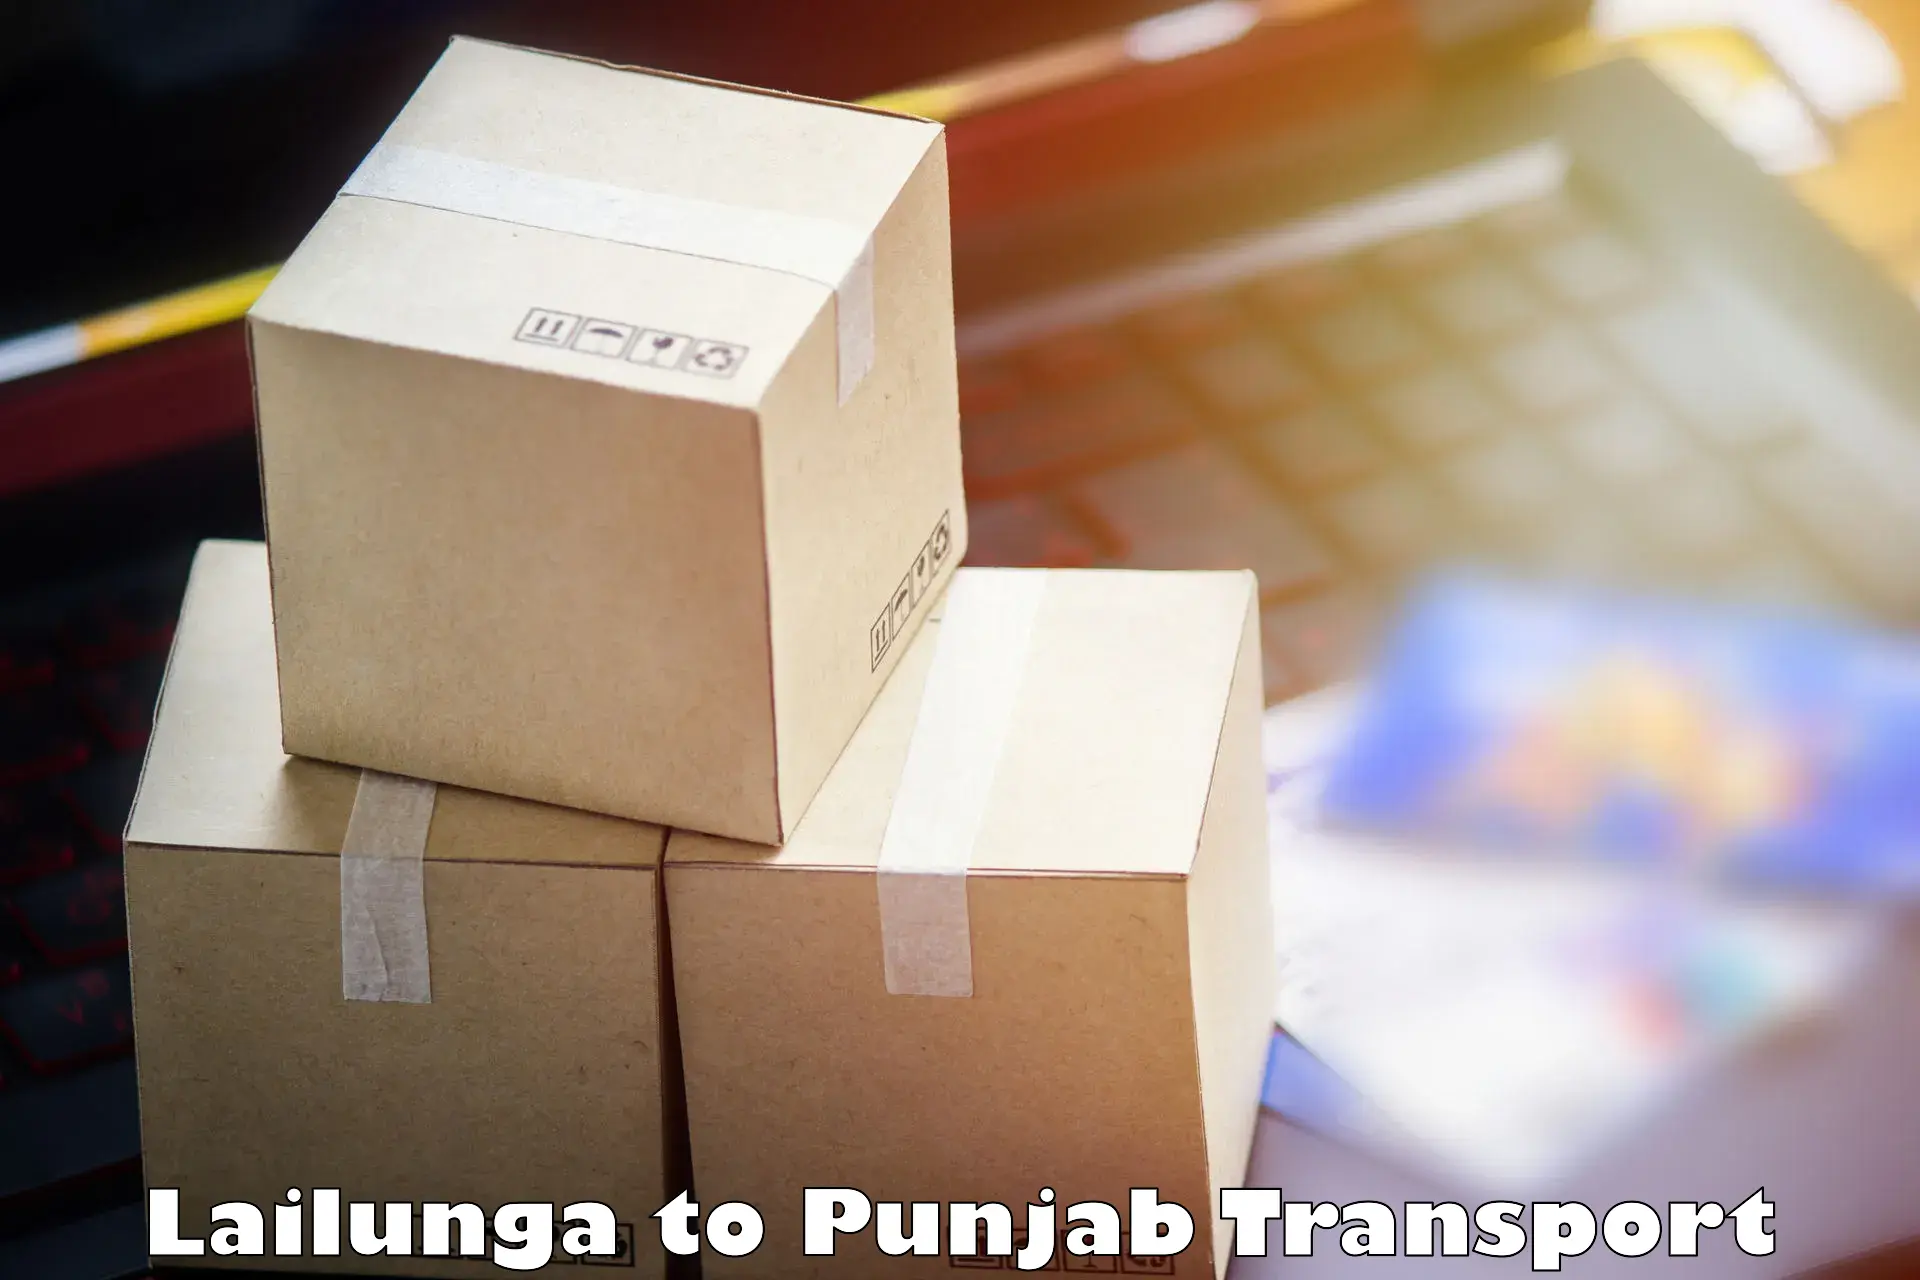 Nationwide transport services in Lailunga to Punjab